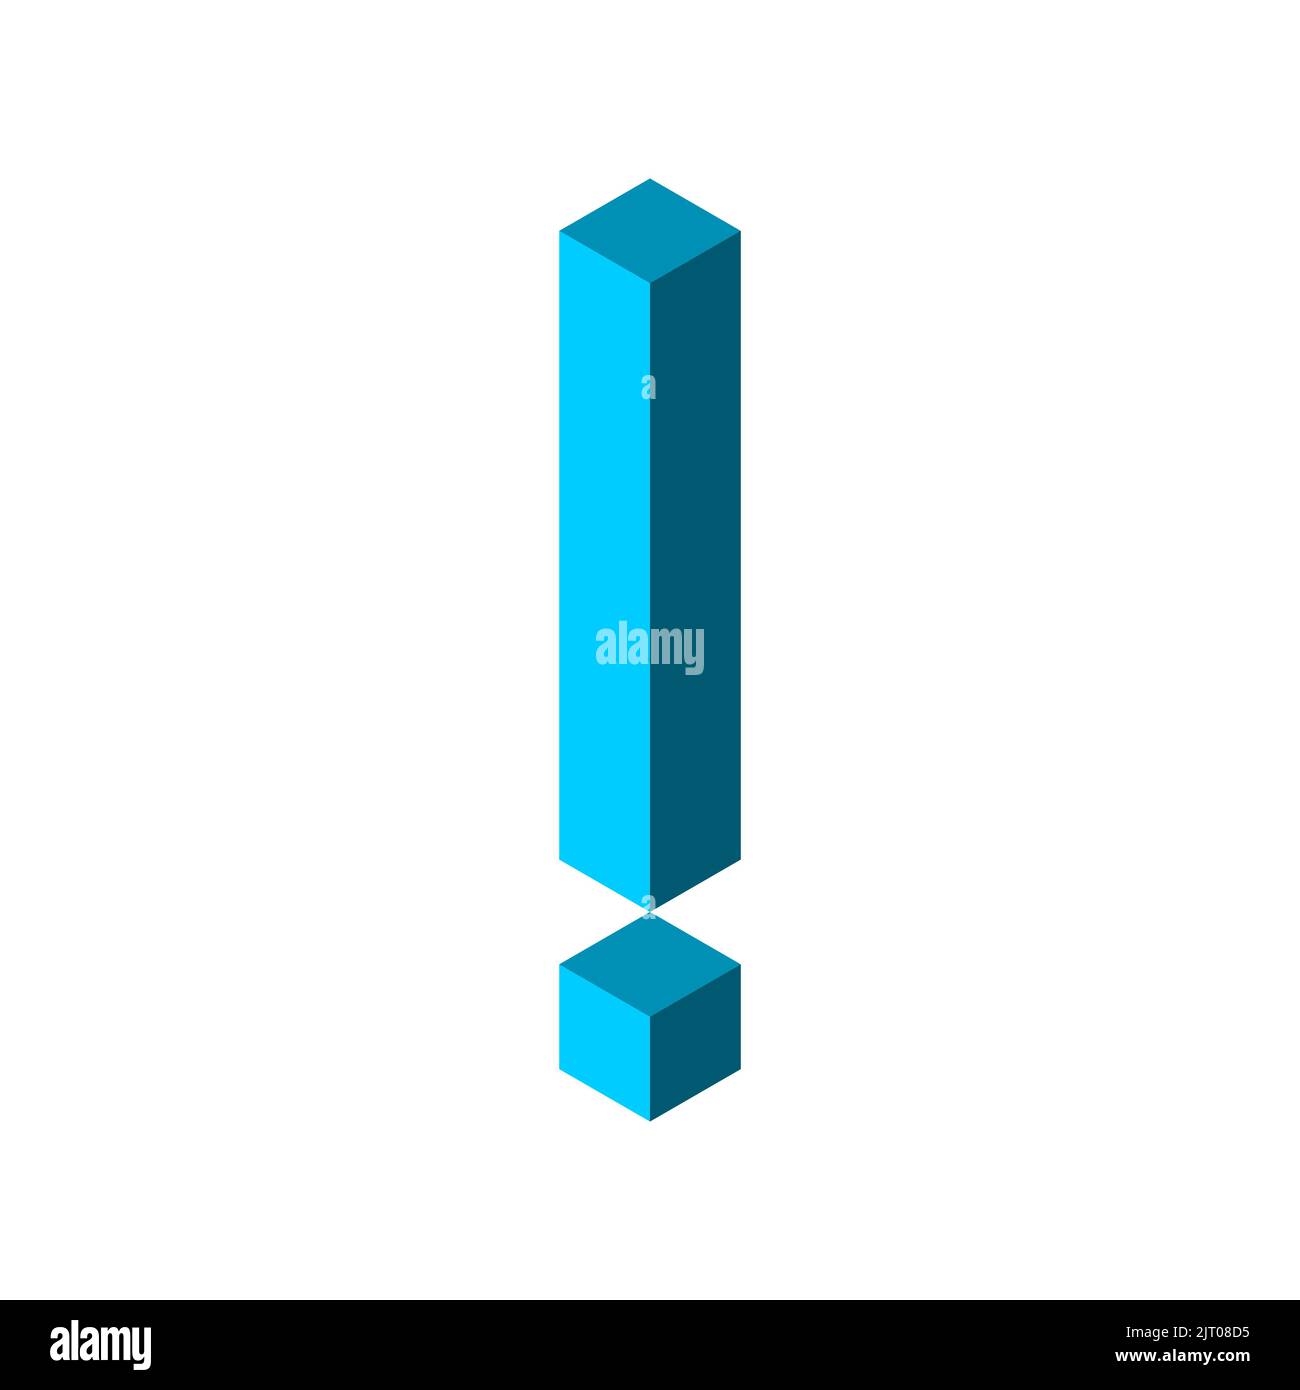 Blue 3D exclamation mark. Geometric exclamation point. Shouting, emphasis, strong feelings, excitement. Isometric shape made of cubes. Vector Stock Vector